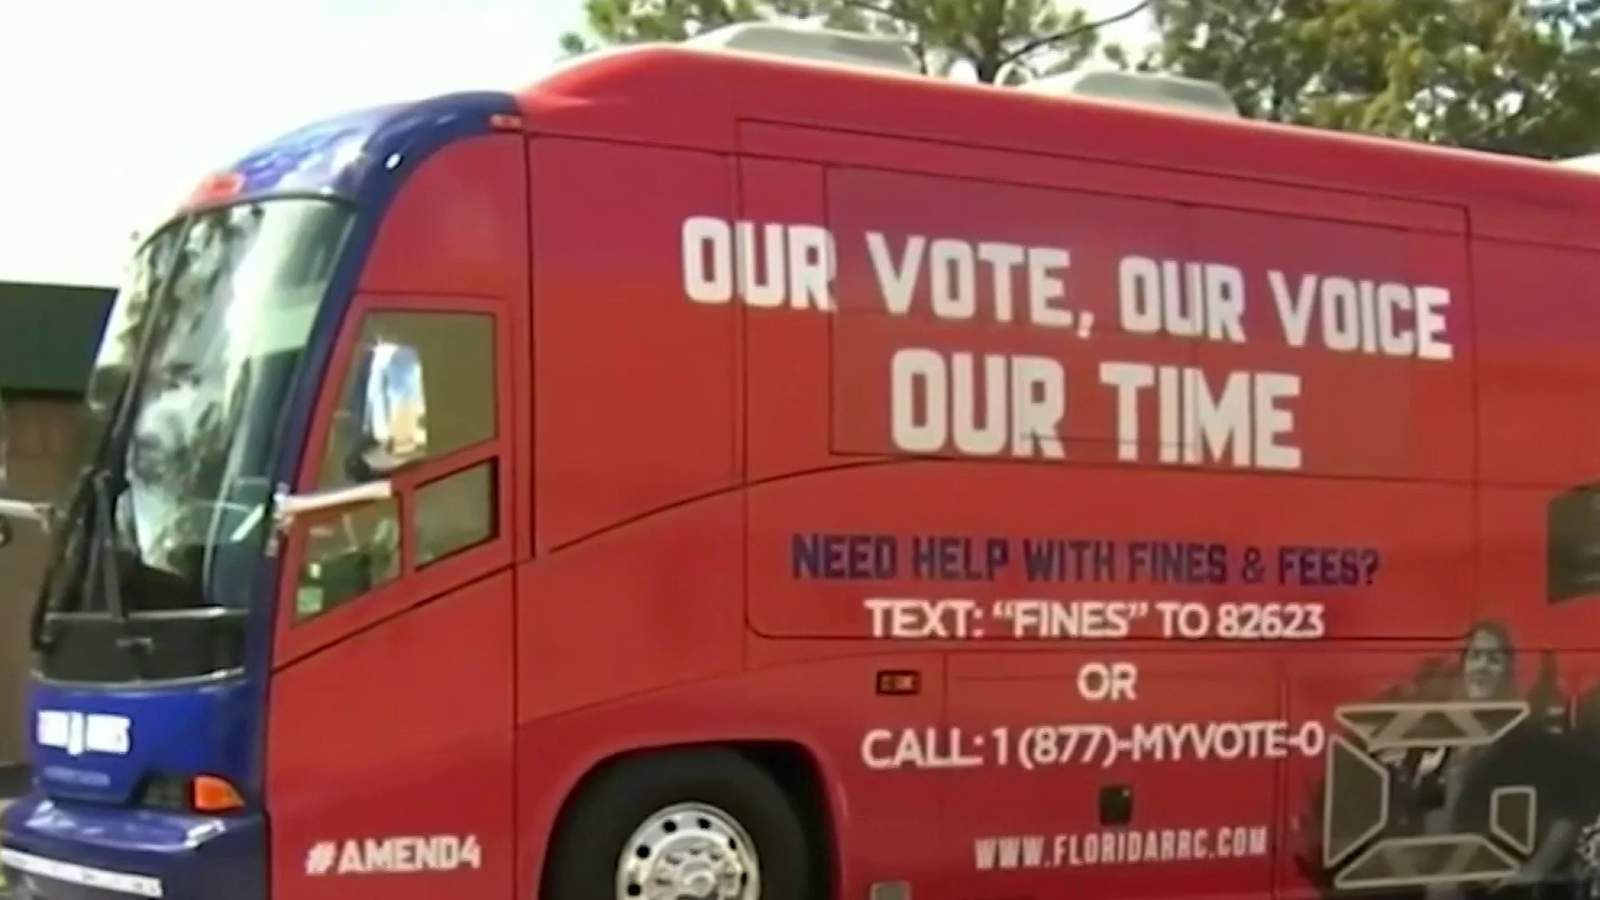 Thousands of returning citizens expected to early vote in Florida on Saturday